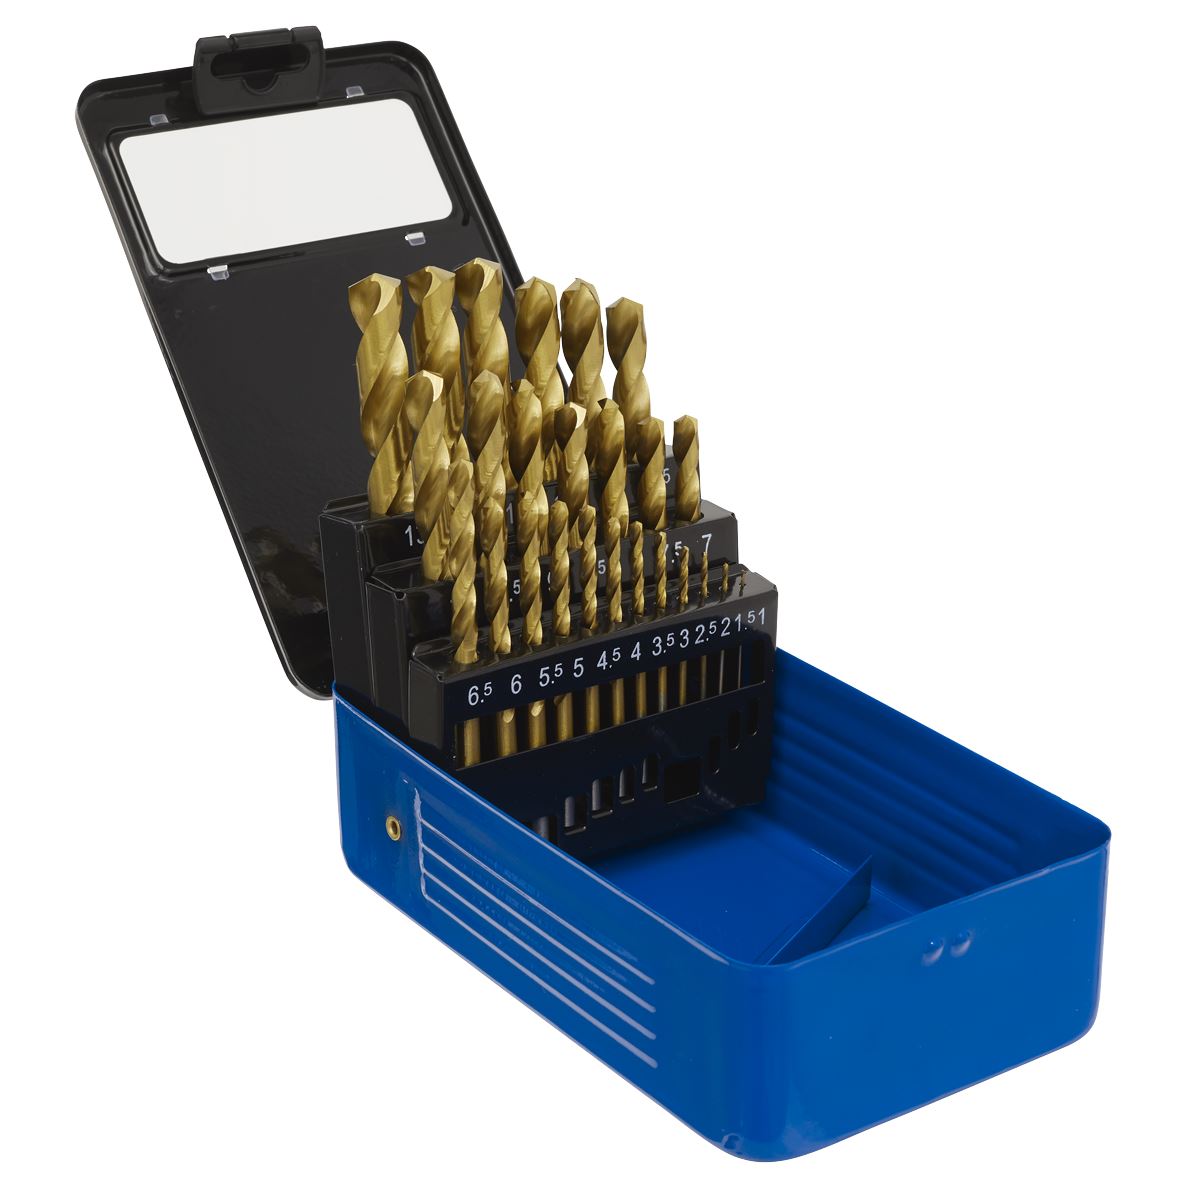 Sealey 25 Piece HSS Fully Ground Drill Bit Set 1-13mm DIN 338 Stainless Steel Copper